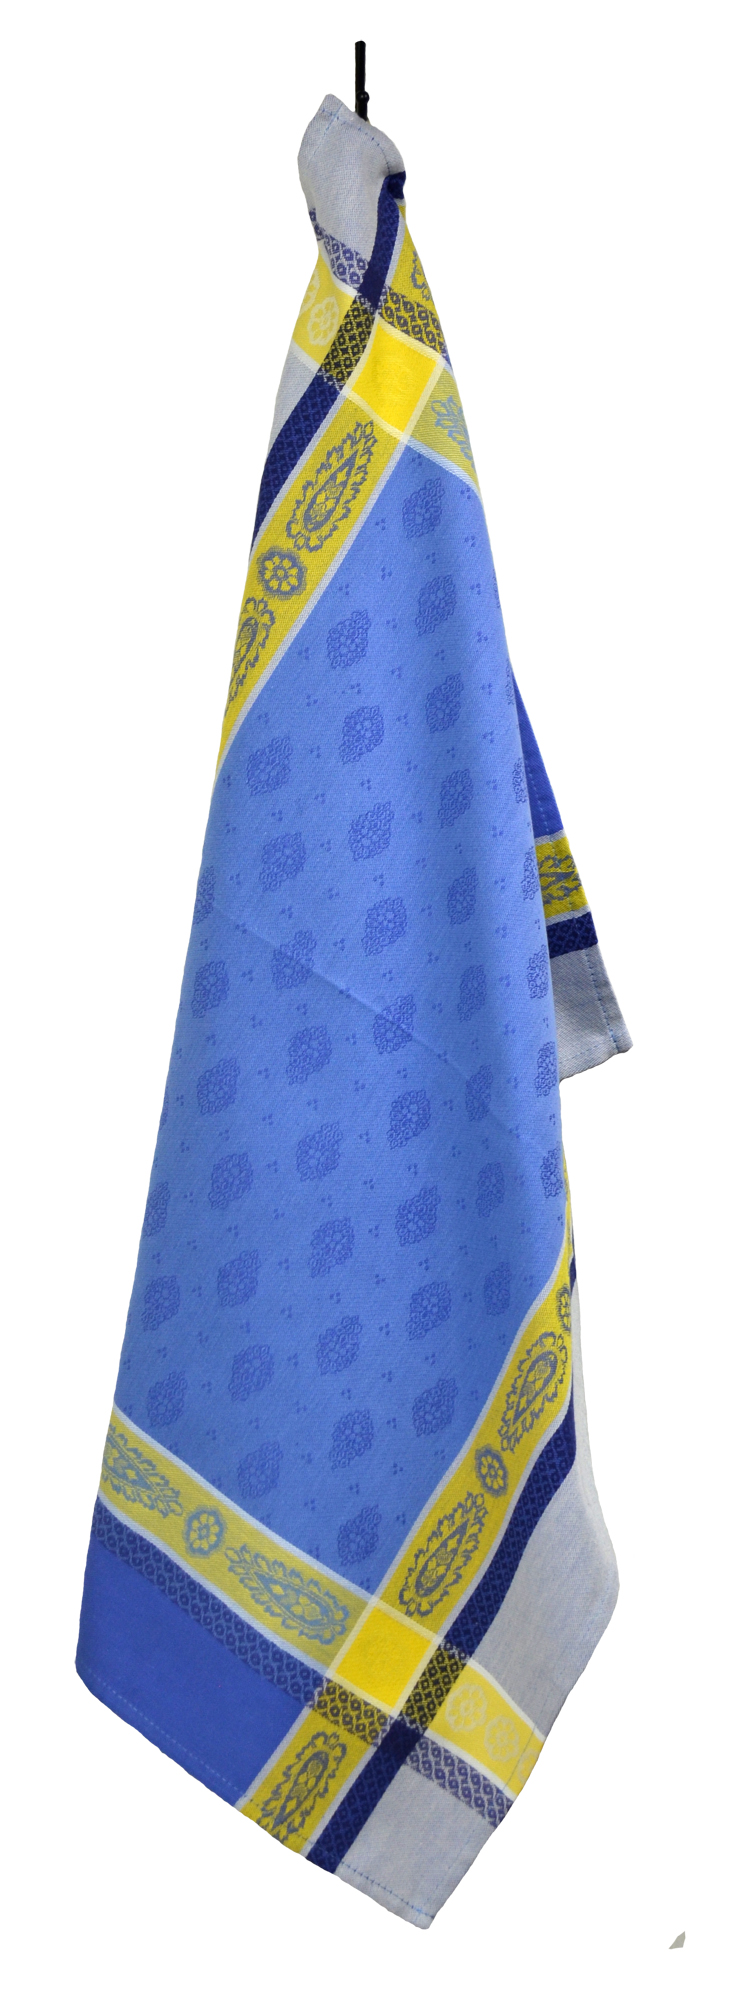 French Jacquard Tea Towel - Collection "Vaucluse" Blue/Yellow, Size: 20 x 28 inches, Price CAN$19.95